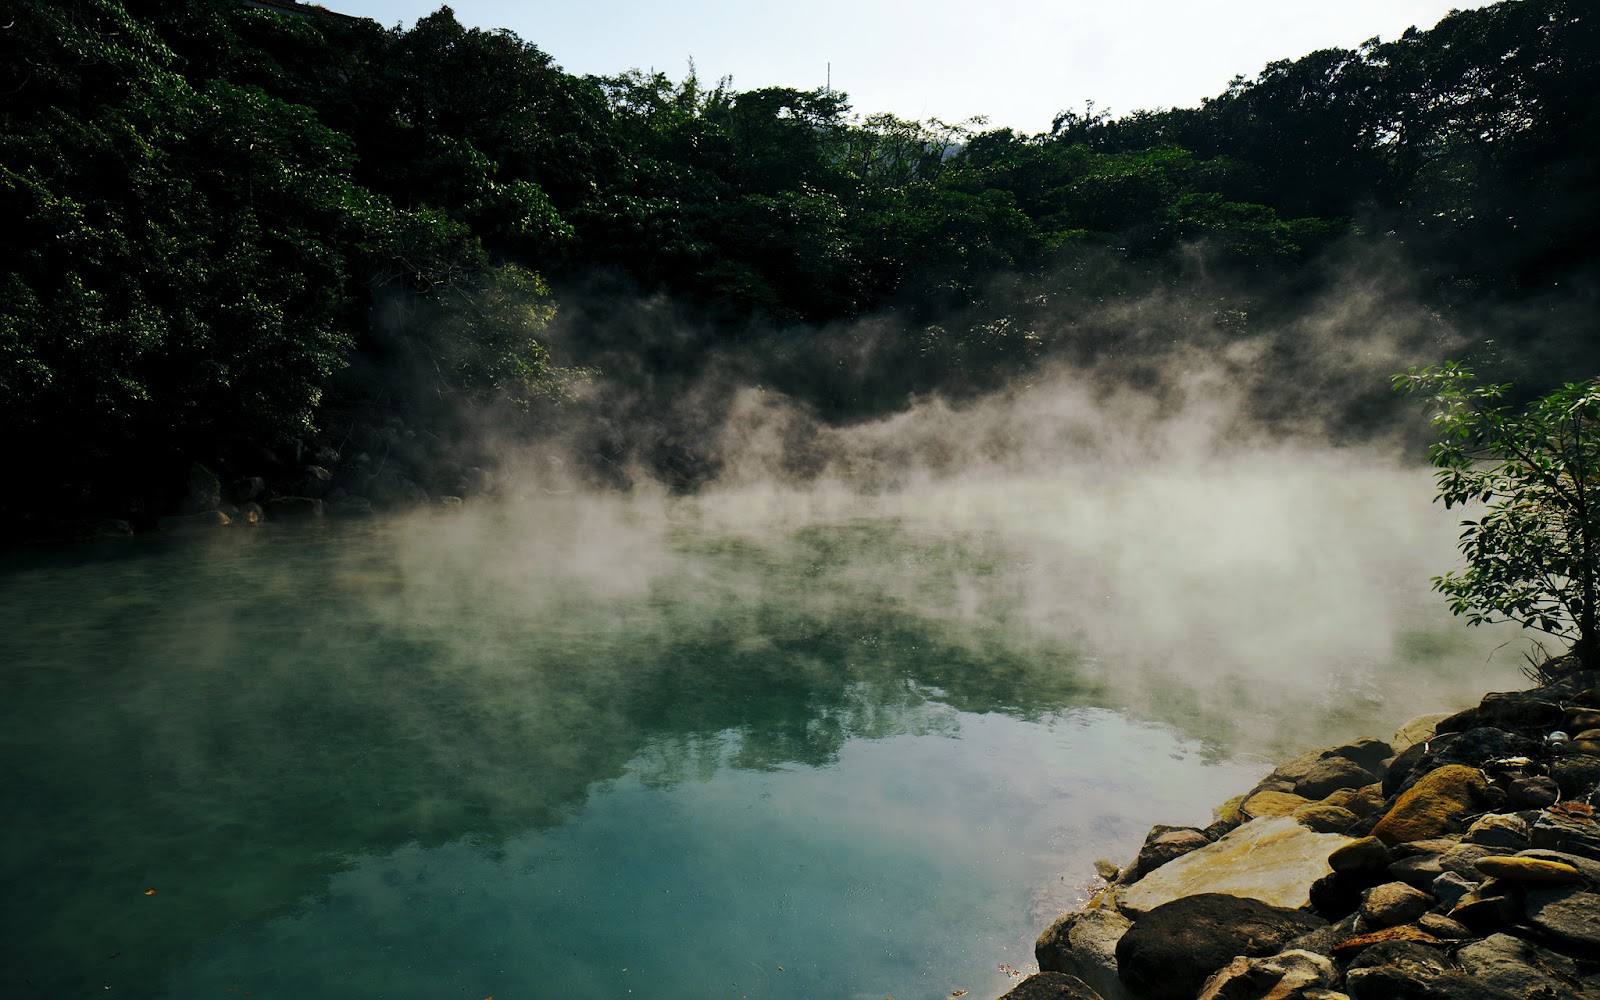 beitou hot springs - 48 hours in taipei